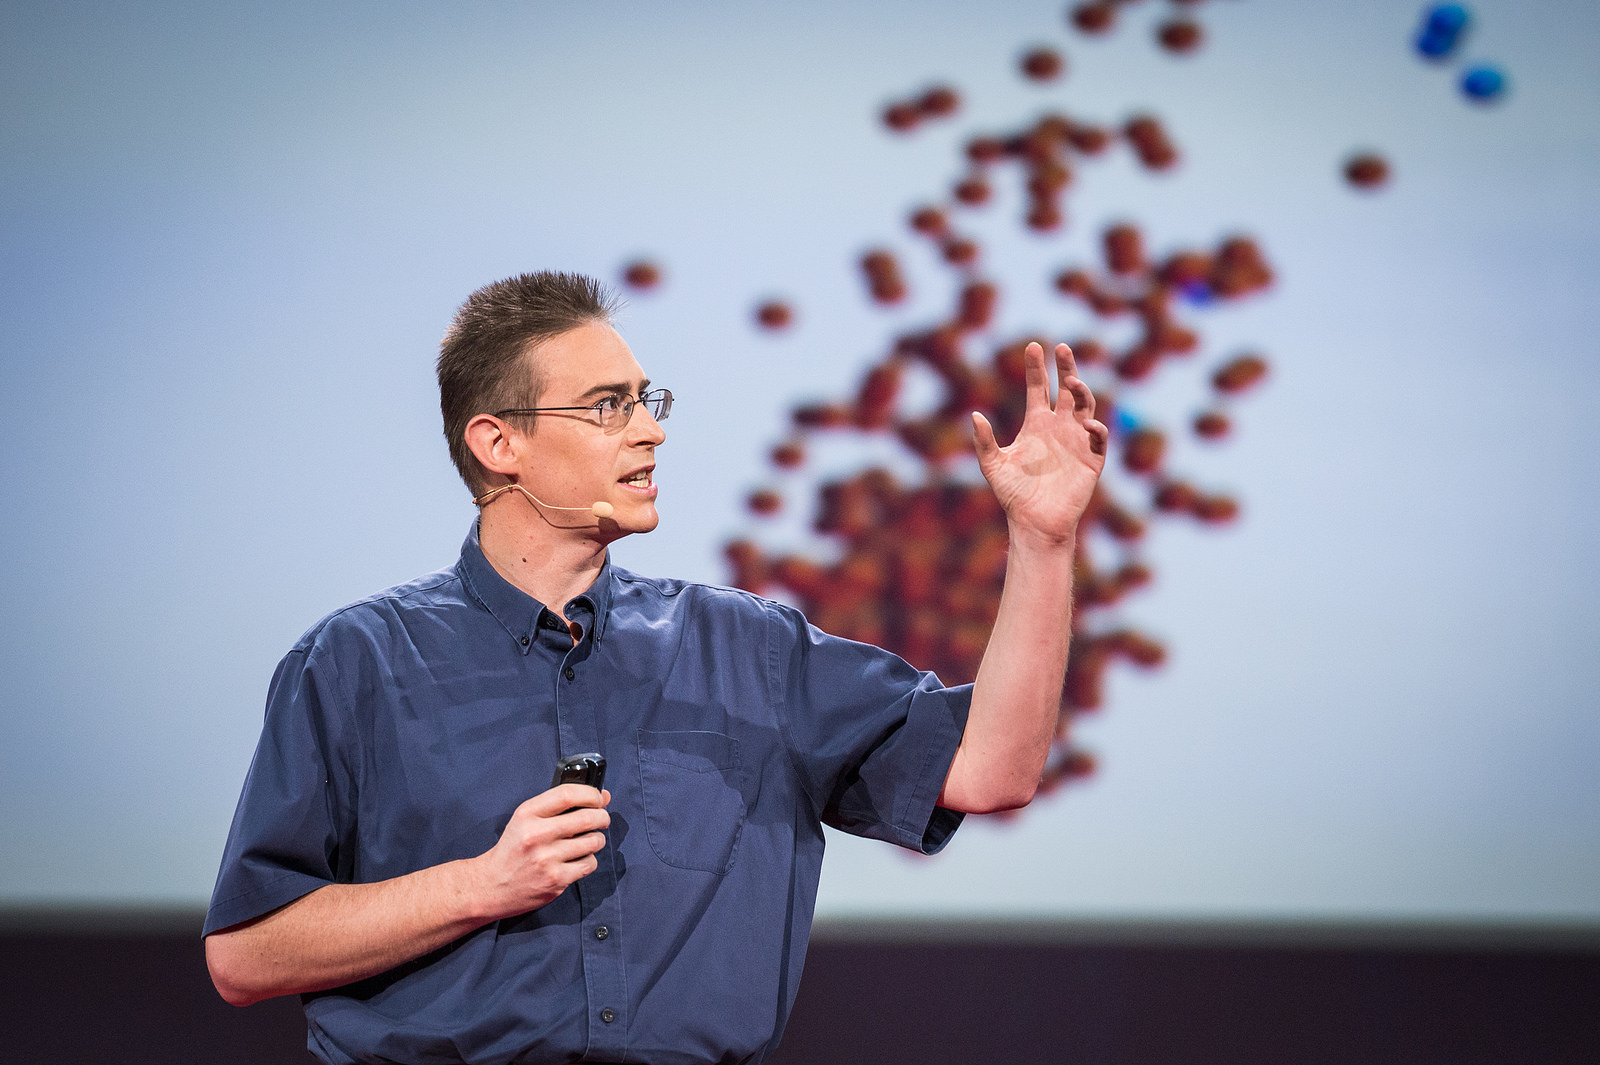 Rob Knight introduced us to the American Gut Project at TED2014. This week, they released some fascinating findings. Photo: James Duncan Davidson